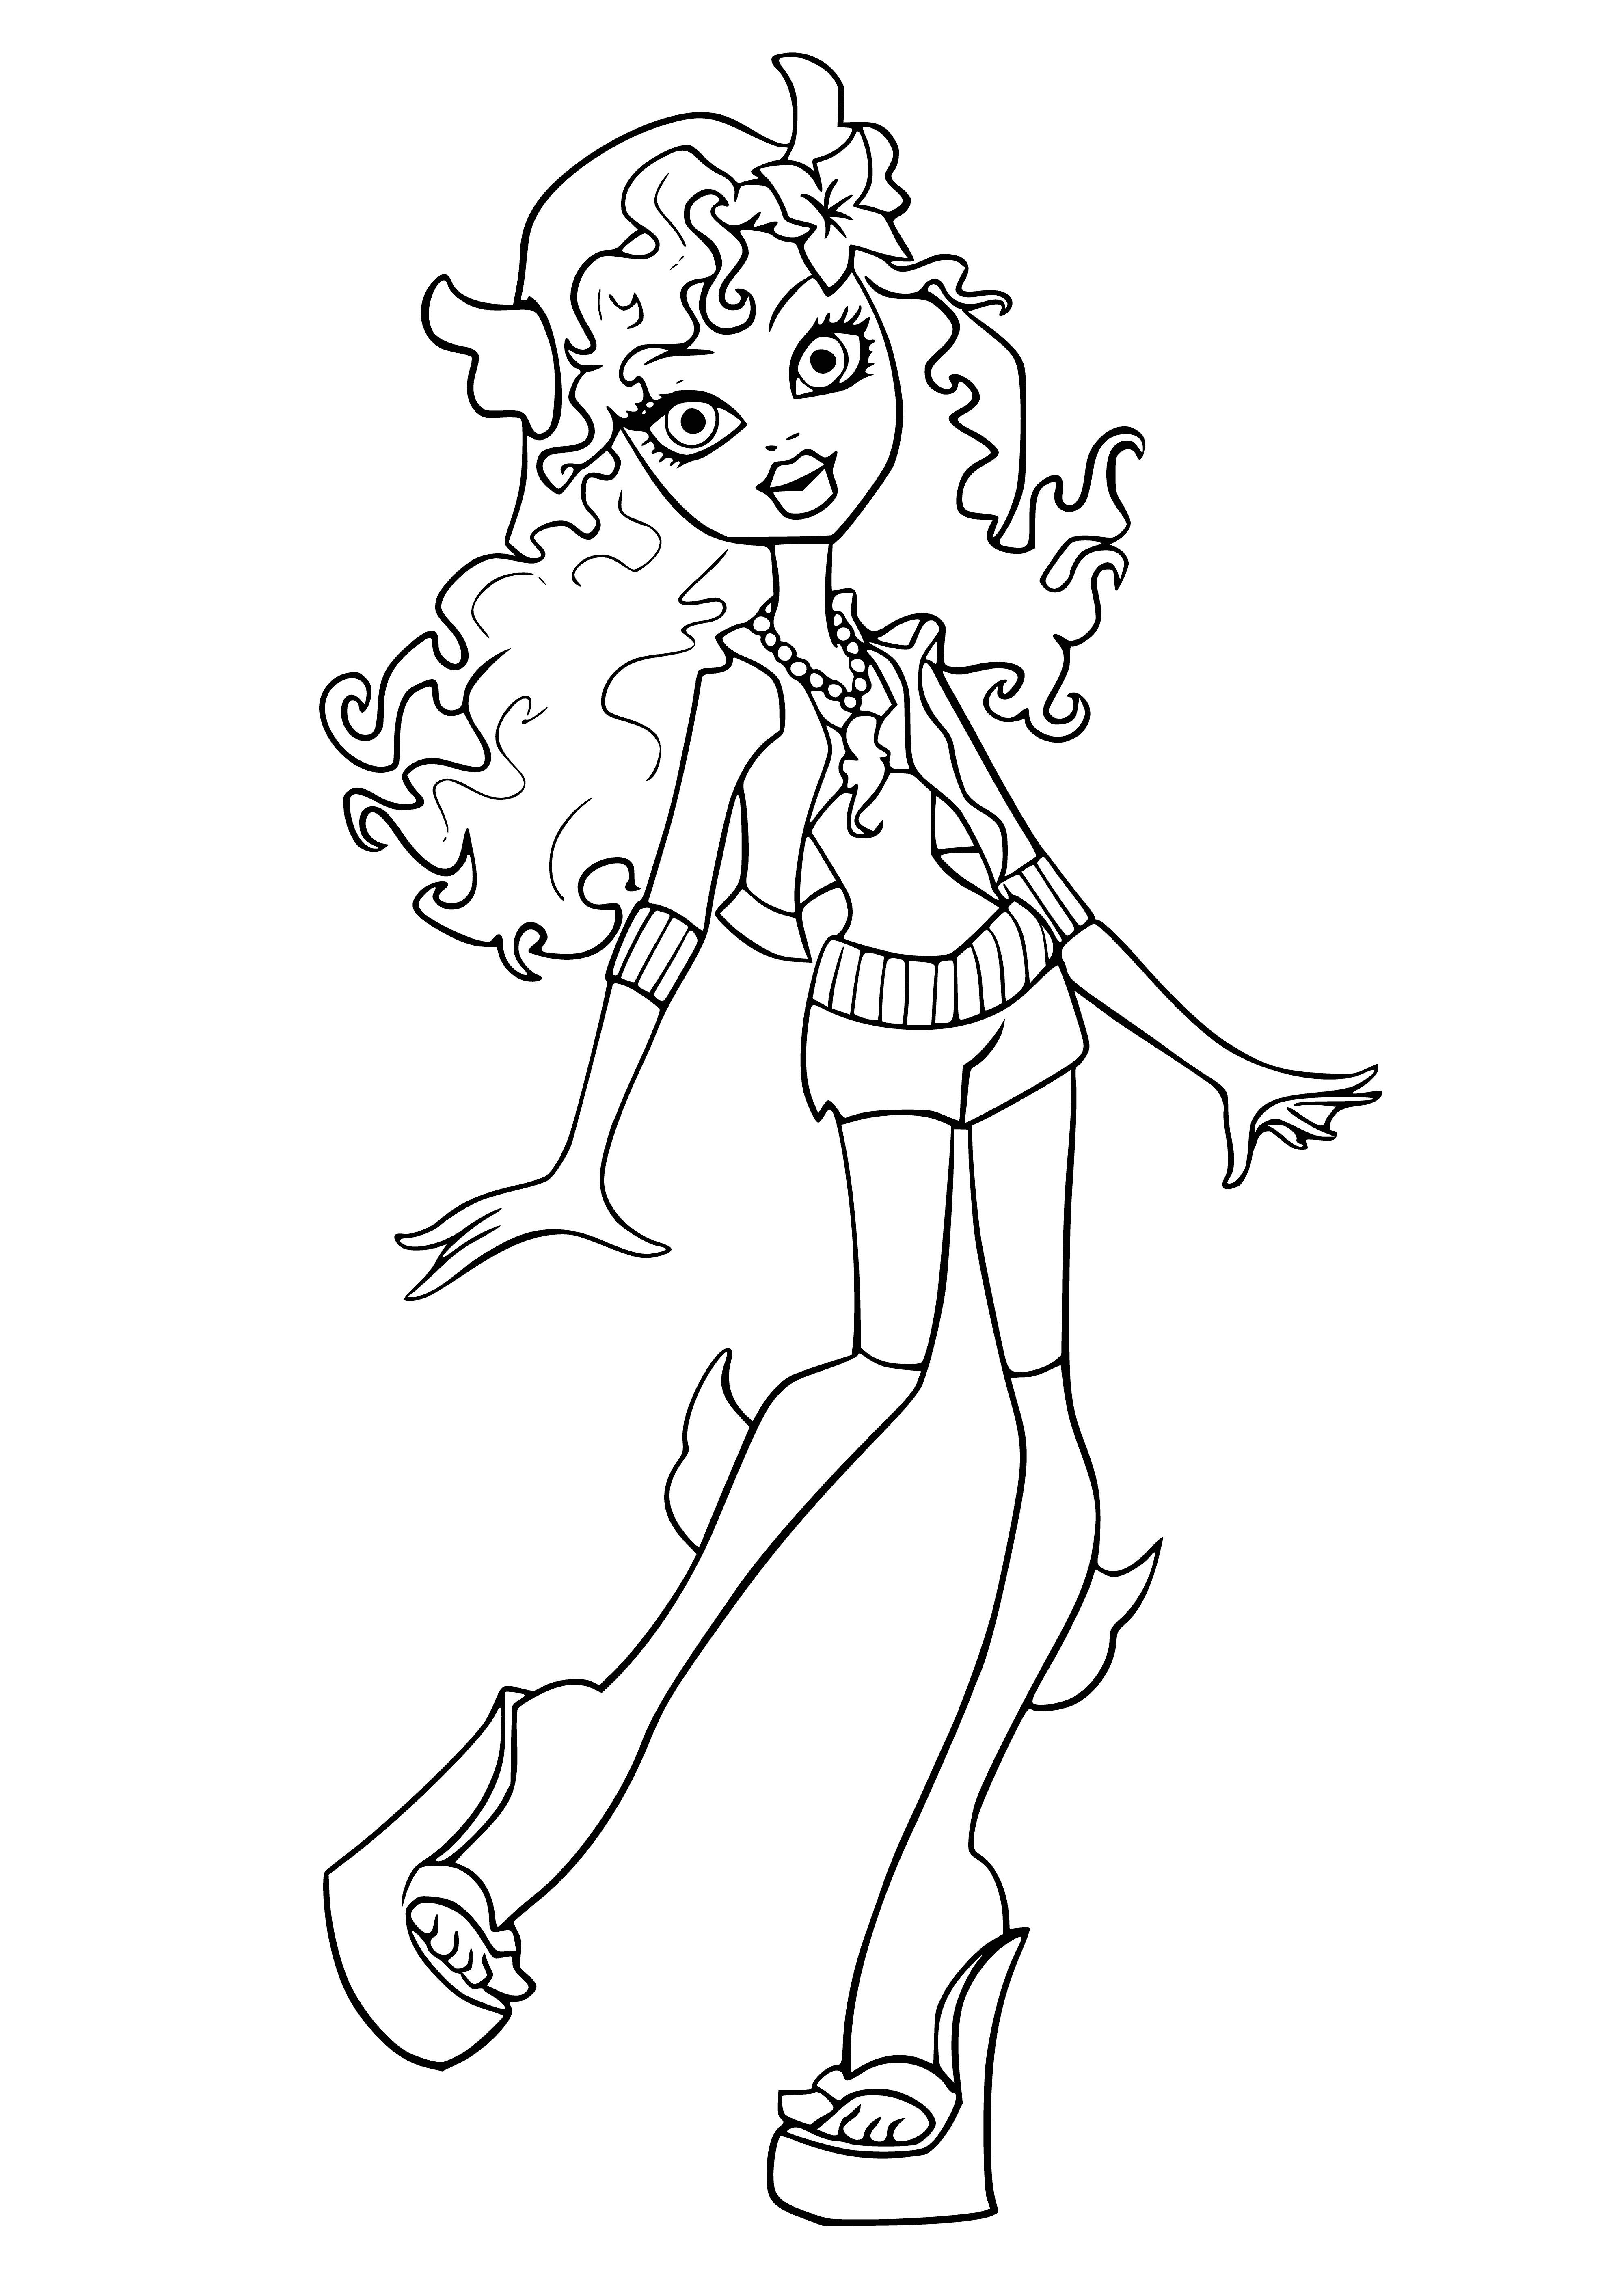 coloring page: Lagoona Blue stands in a blue lagoon, wears a blue bikini, with blue eyes & hair. Smiling & holding a blue drink, she enjoys the paradise.